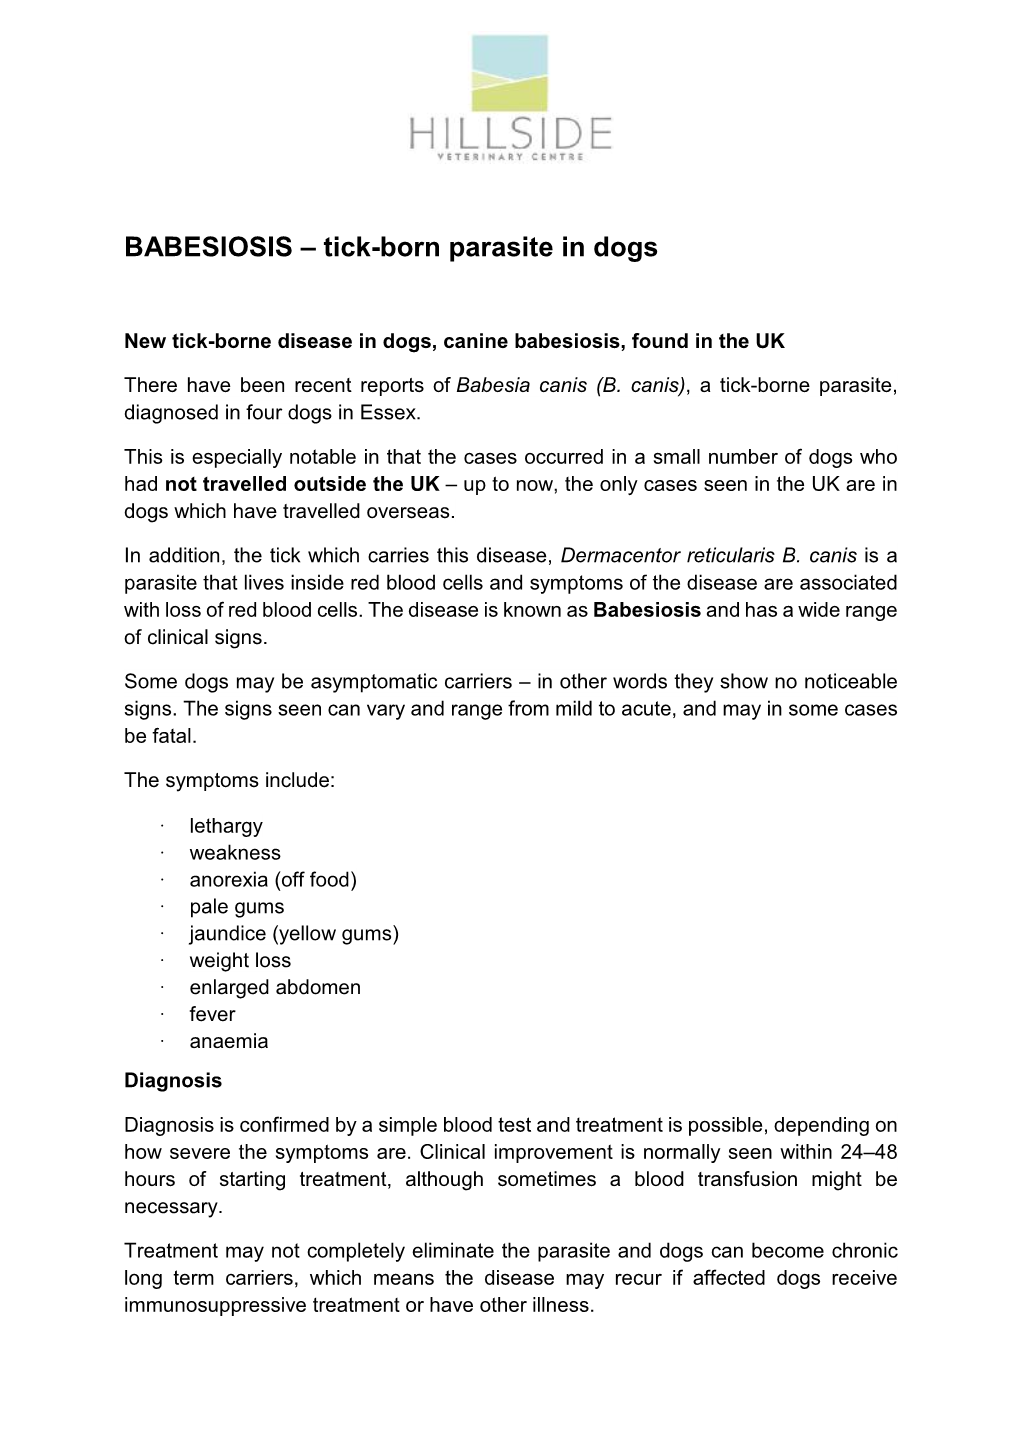 BABESIOSIS – Tick-Born Parasite in Dogs